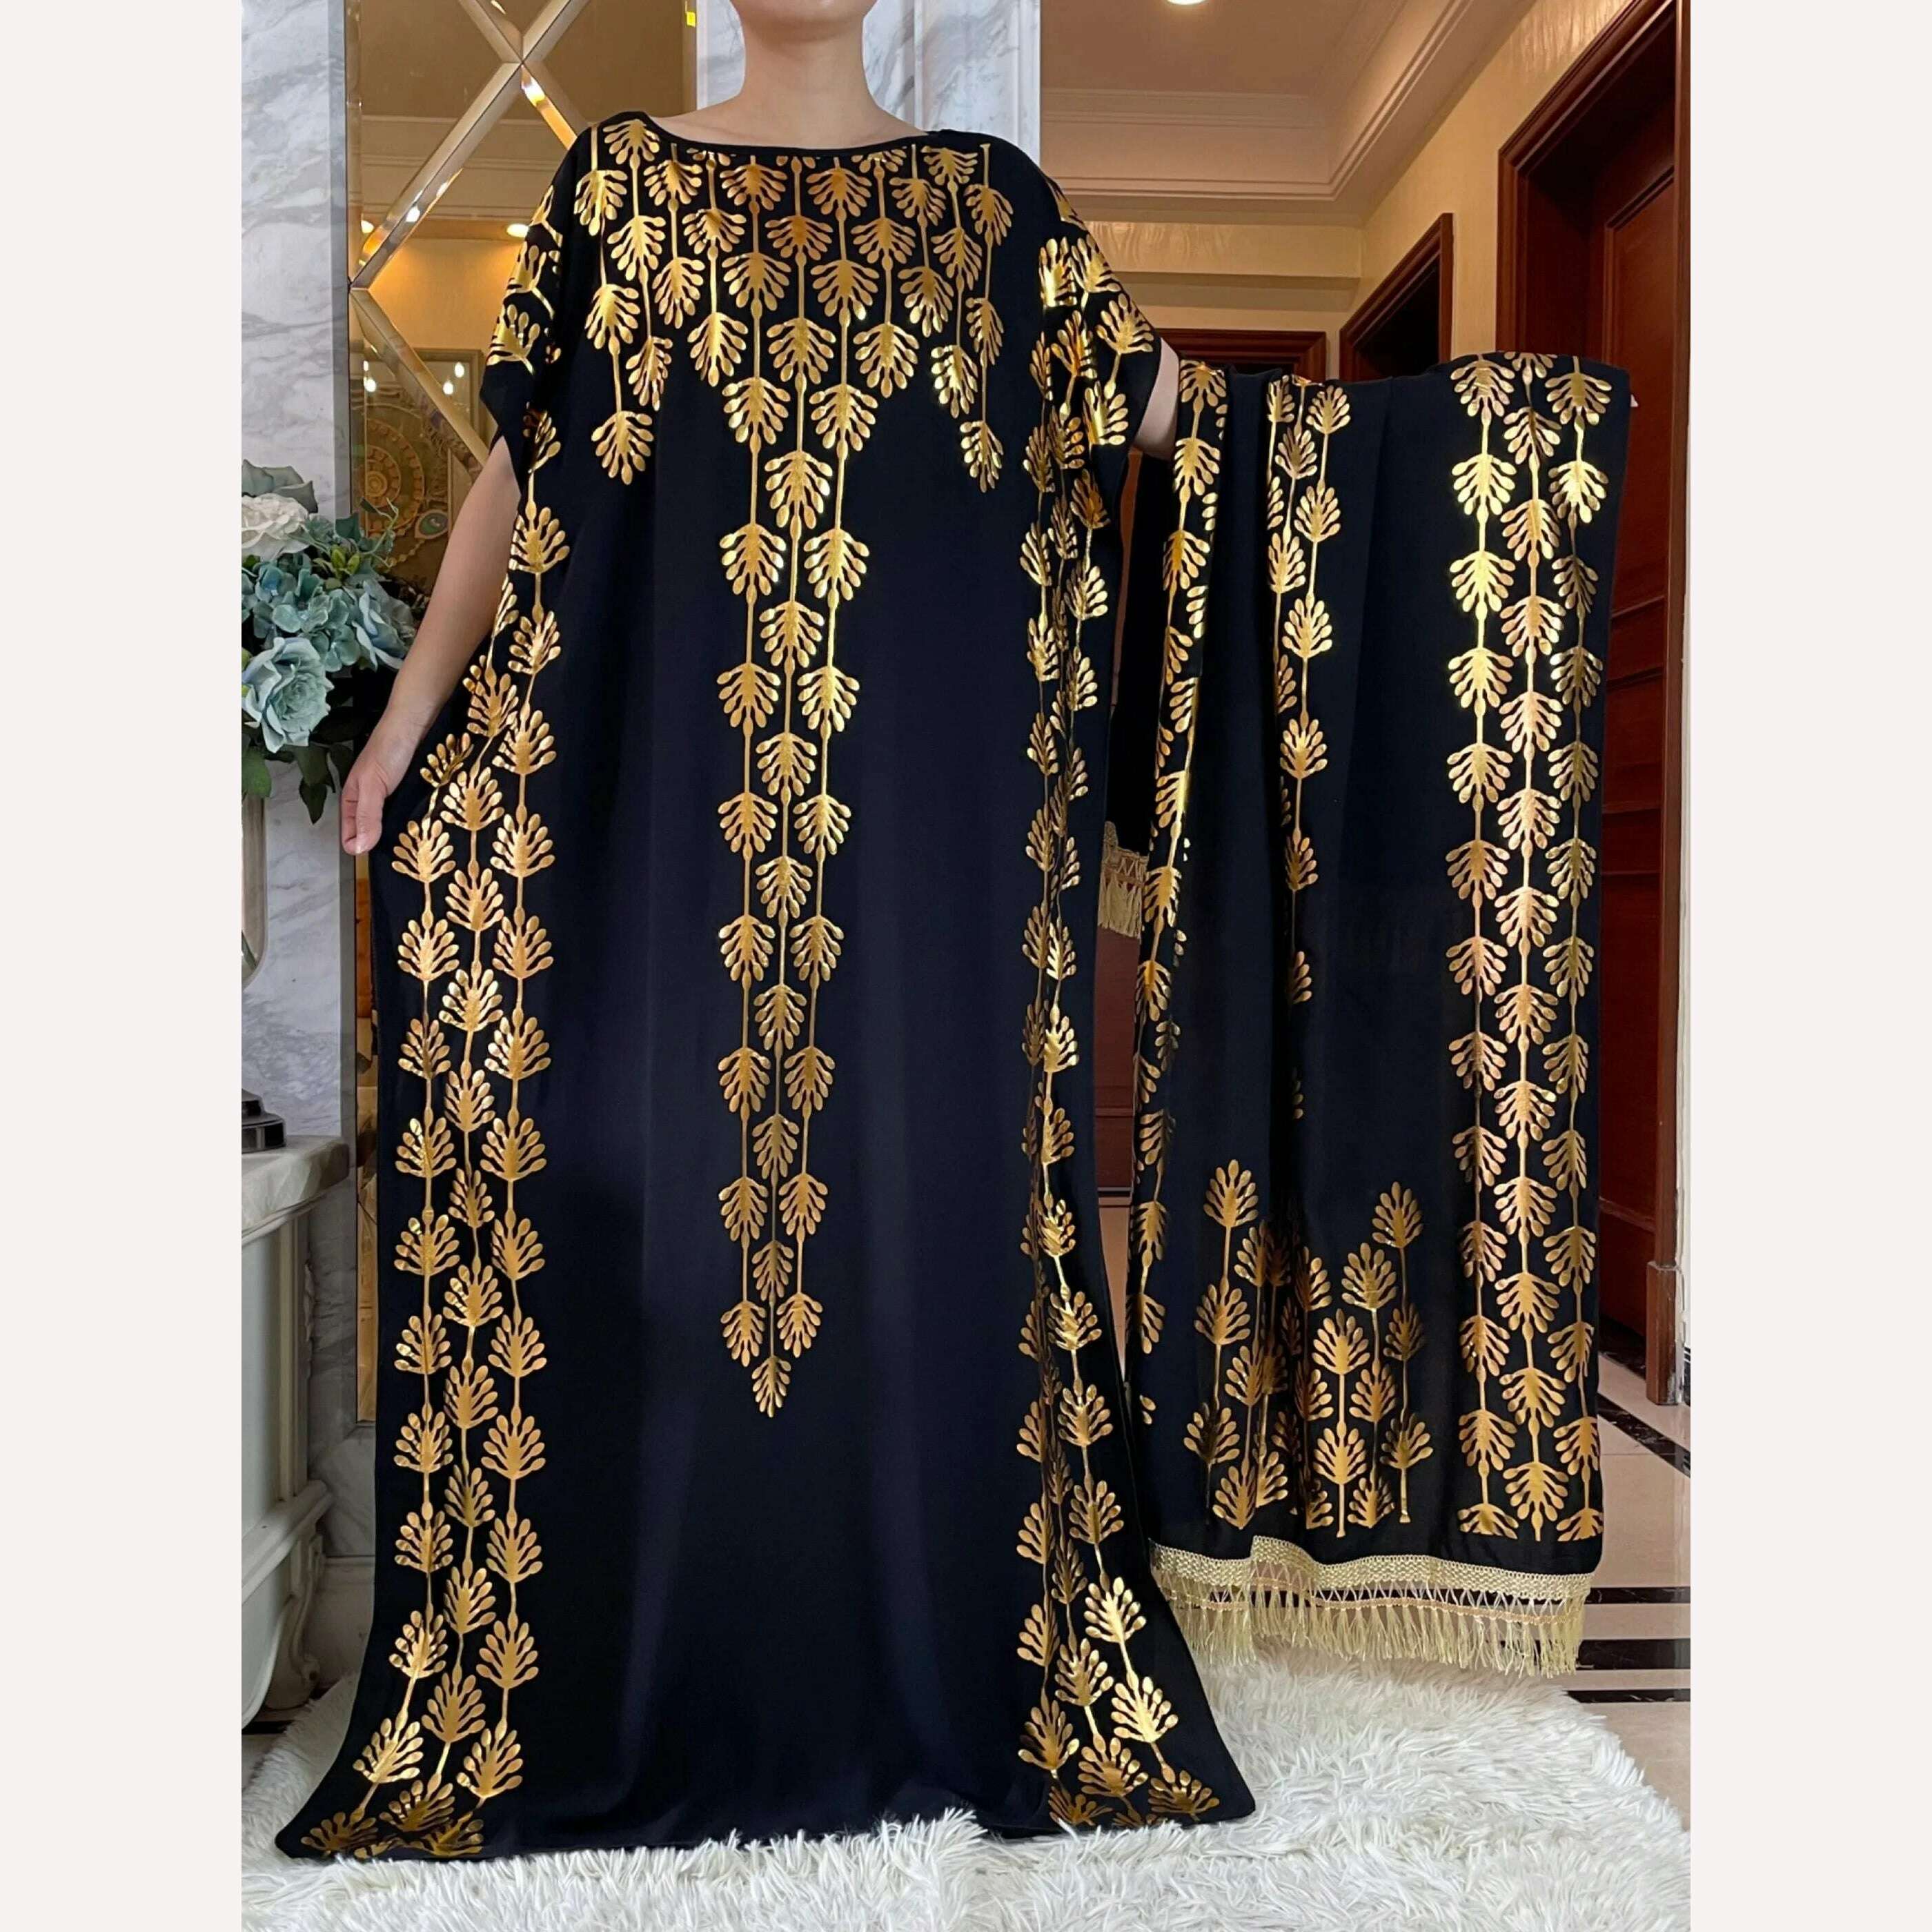 KIMLUD, Dubai New Abaya For Women  Summer Short Sleeve Cotton Dress Gold Stamping Loose Lady Maxi Islam African Dress With Big Scarf, HB438-1 / One Size, KIMLUD Women's Clothes